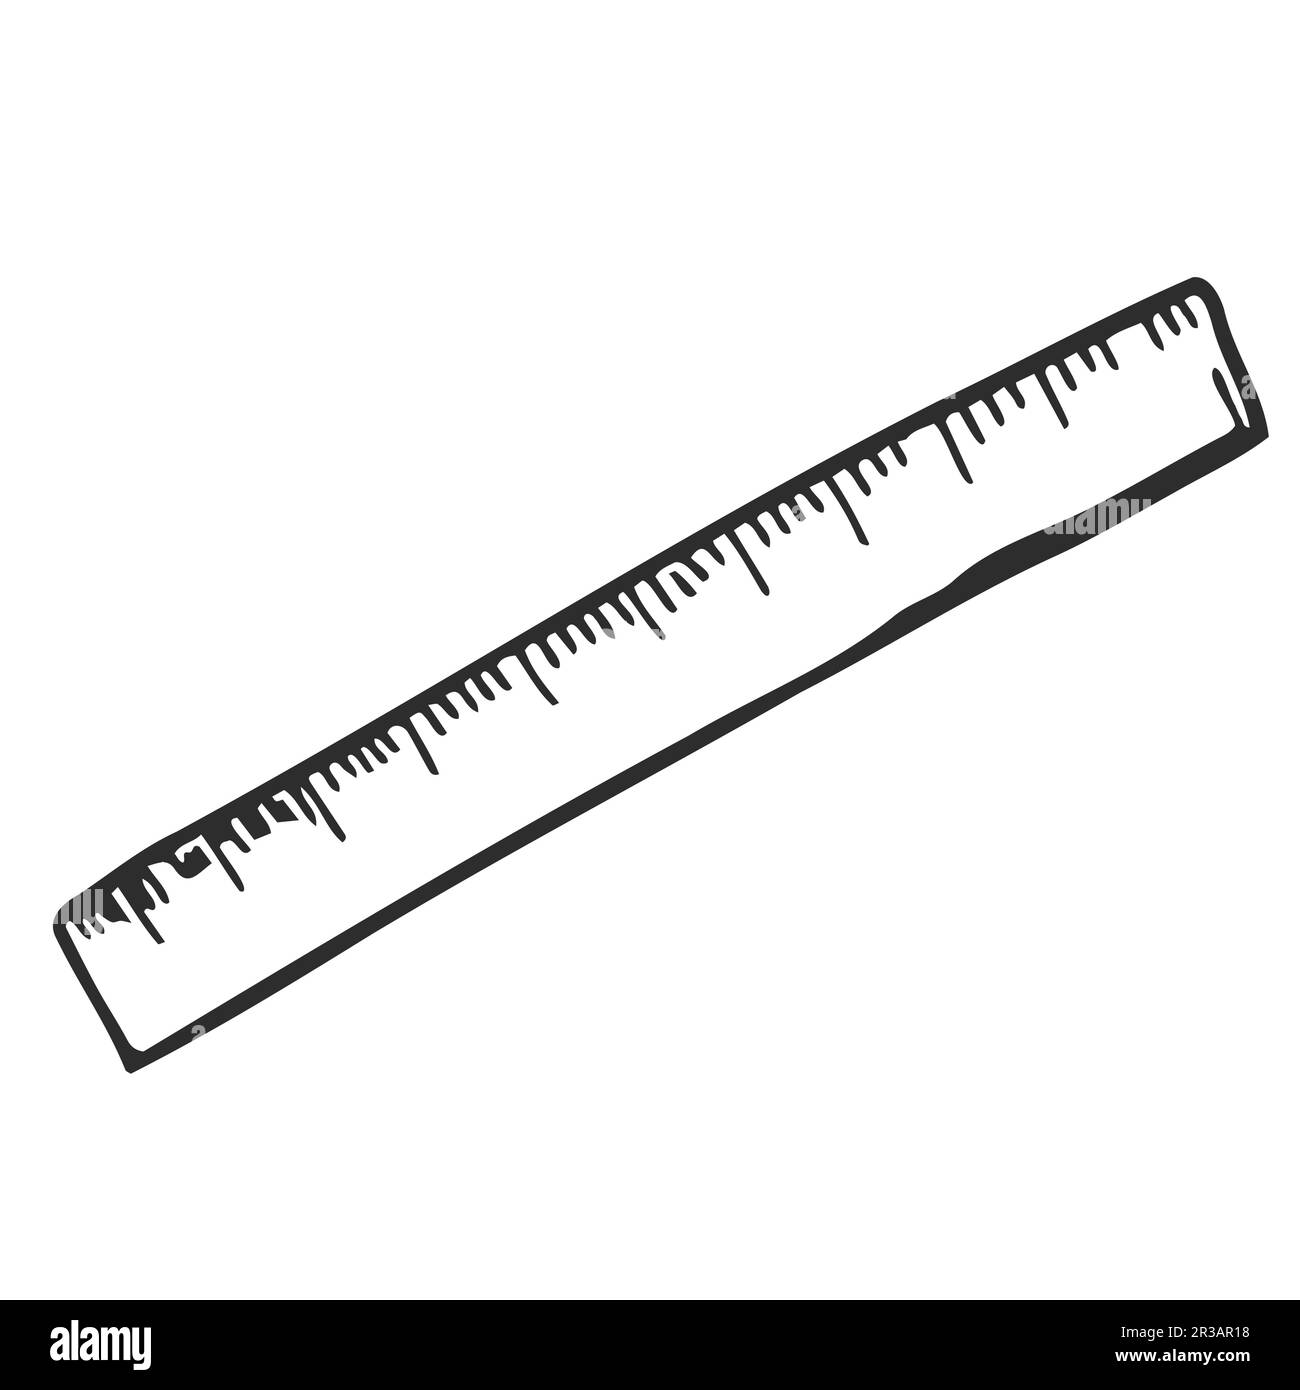 Simple Hand Drawn Plastic Angle Ruler, Office Supply, School